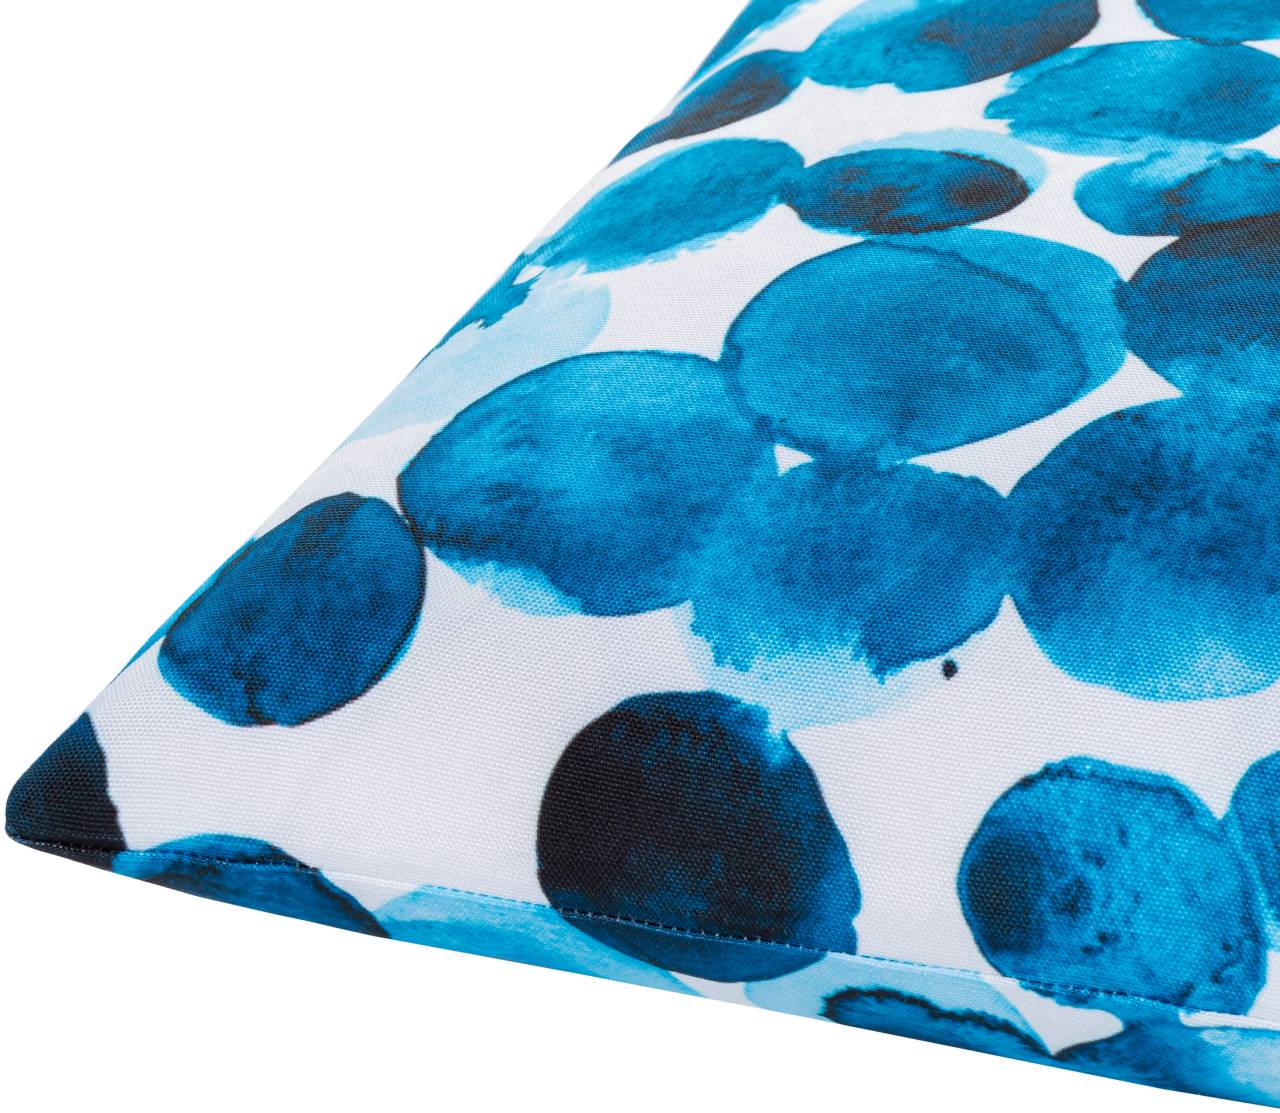 Dilbeek Bright Blue Pillow Cover